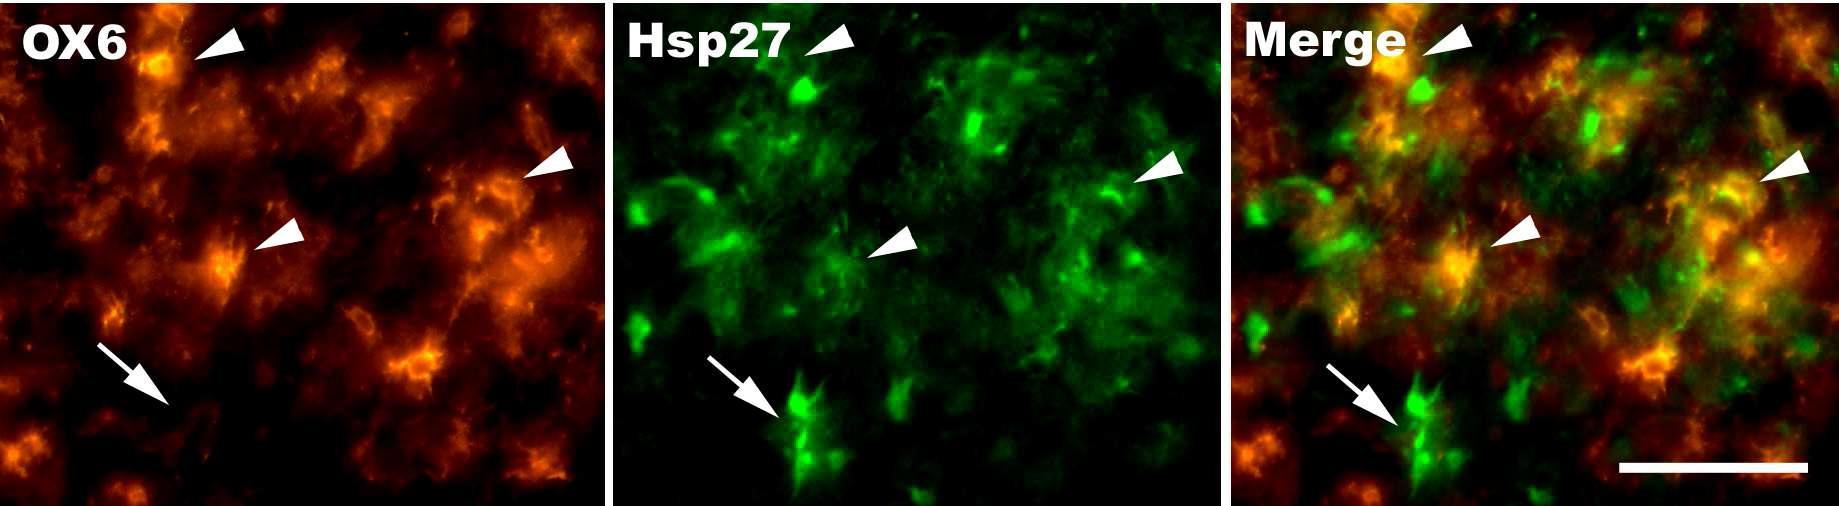 Double immunofluorescence of OX6 and Hsp27 and their merged image. Scal bar represents 30 um.